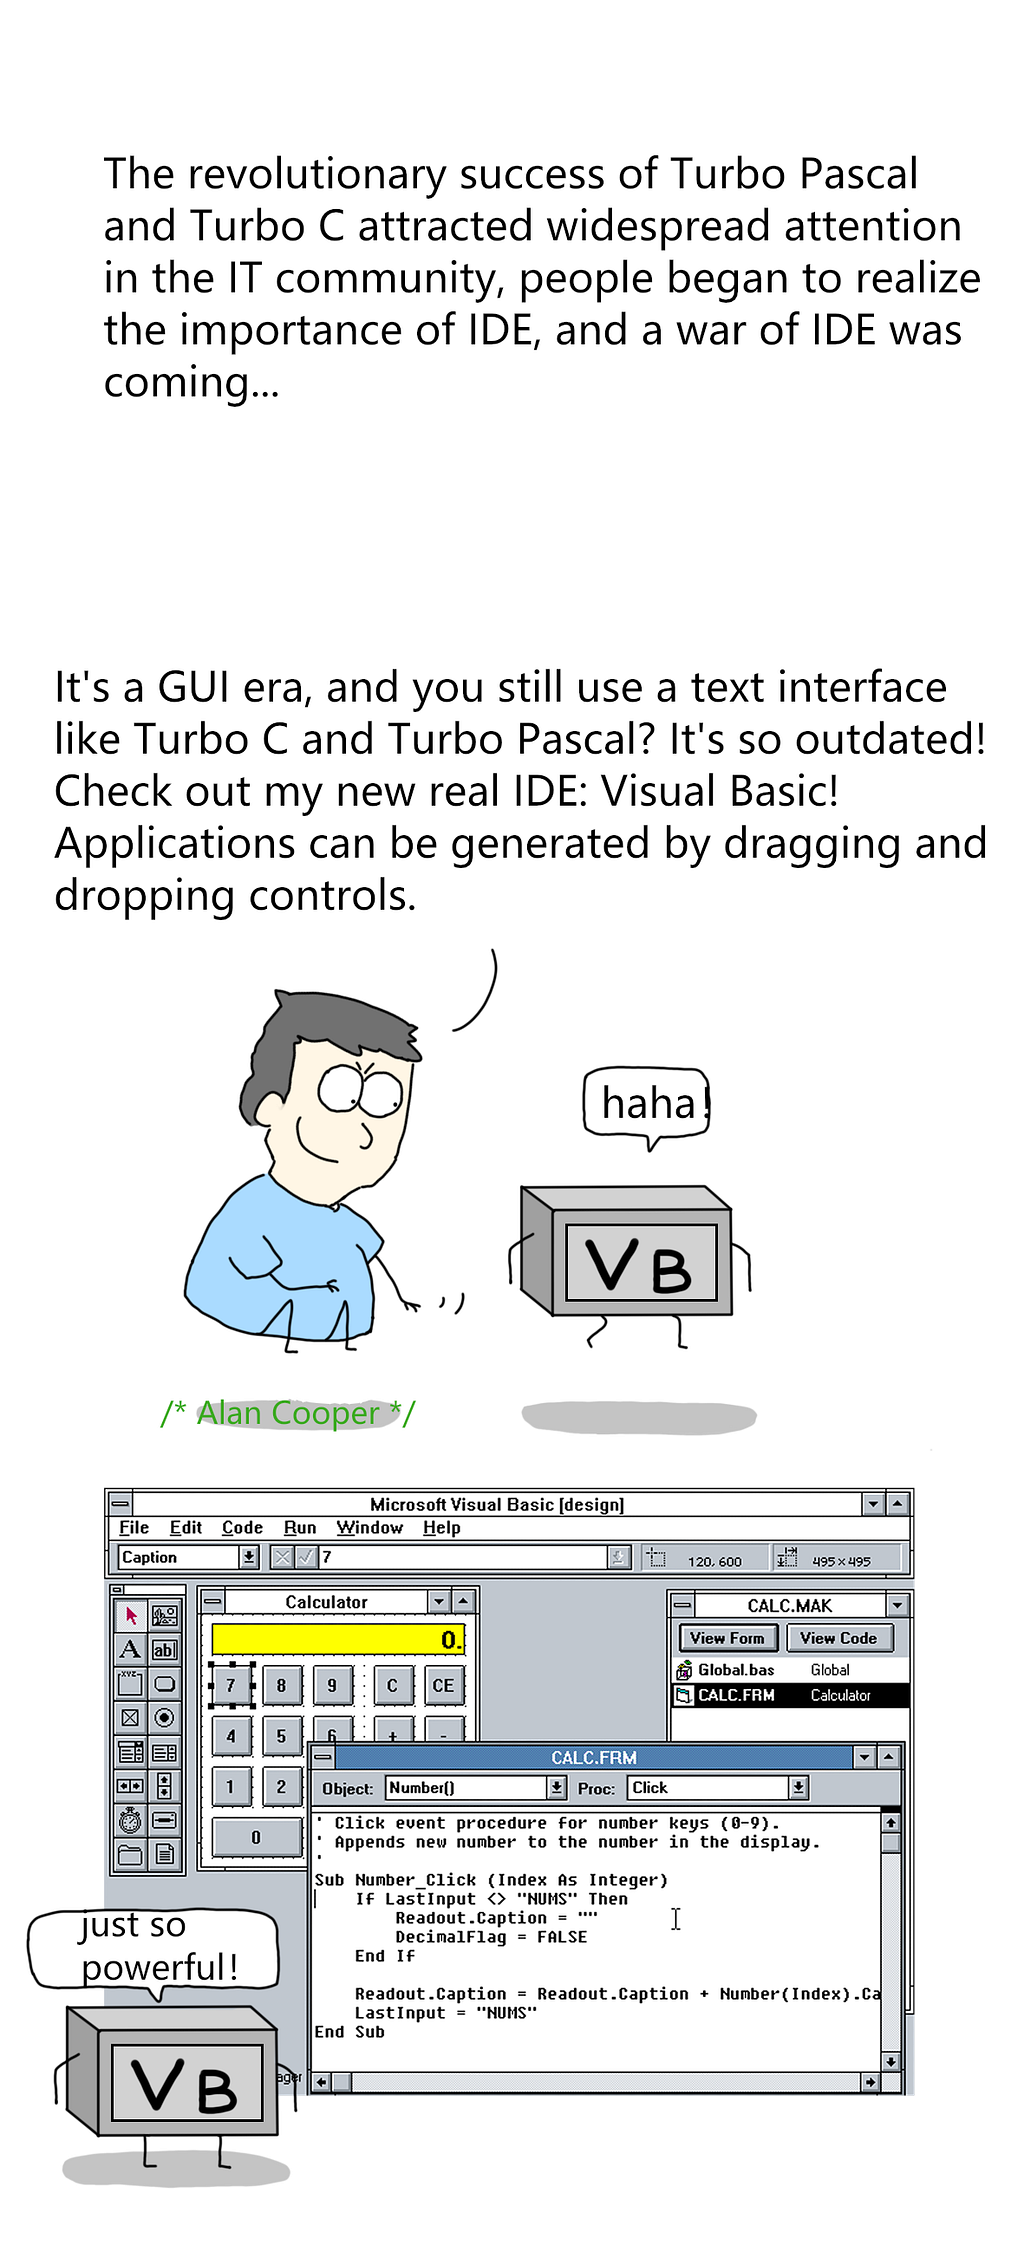 Alan Cooper — It’S a GUI era, and you’re still using a text interface like Turbo C and Turbo Pascal? Outdated! Check out my new IDE: Visual Basic. Apps can be made by dragging and dropping controls.